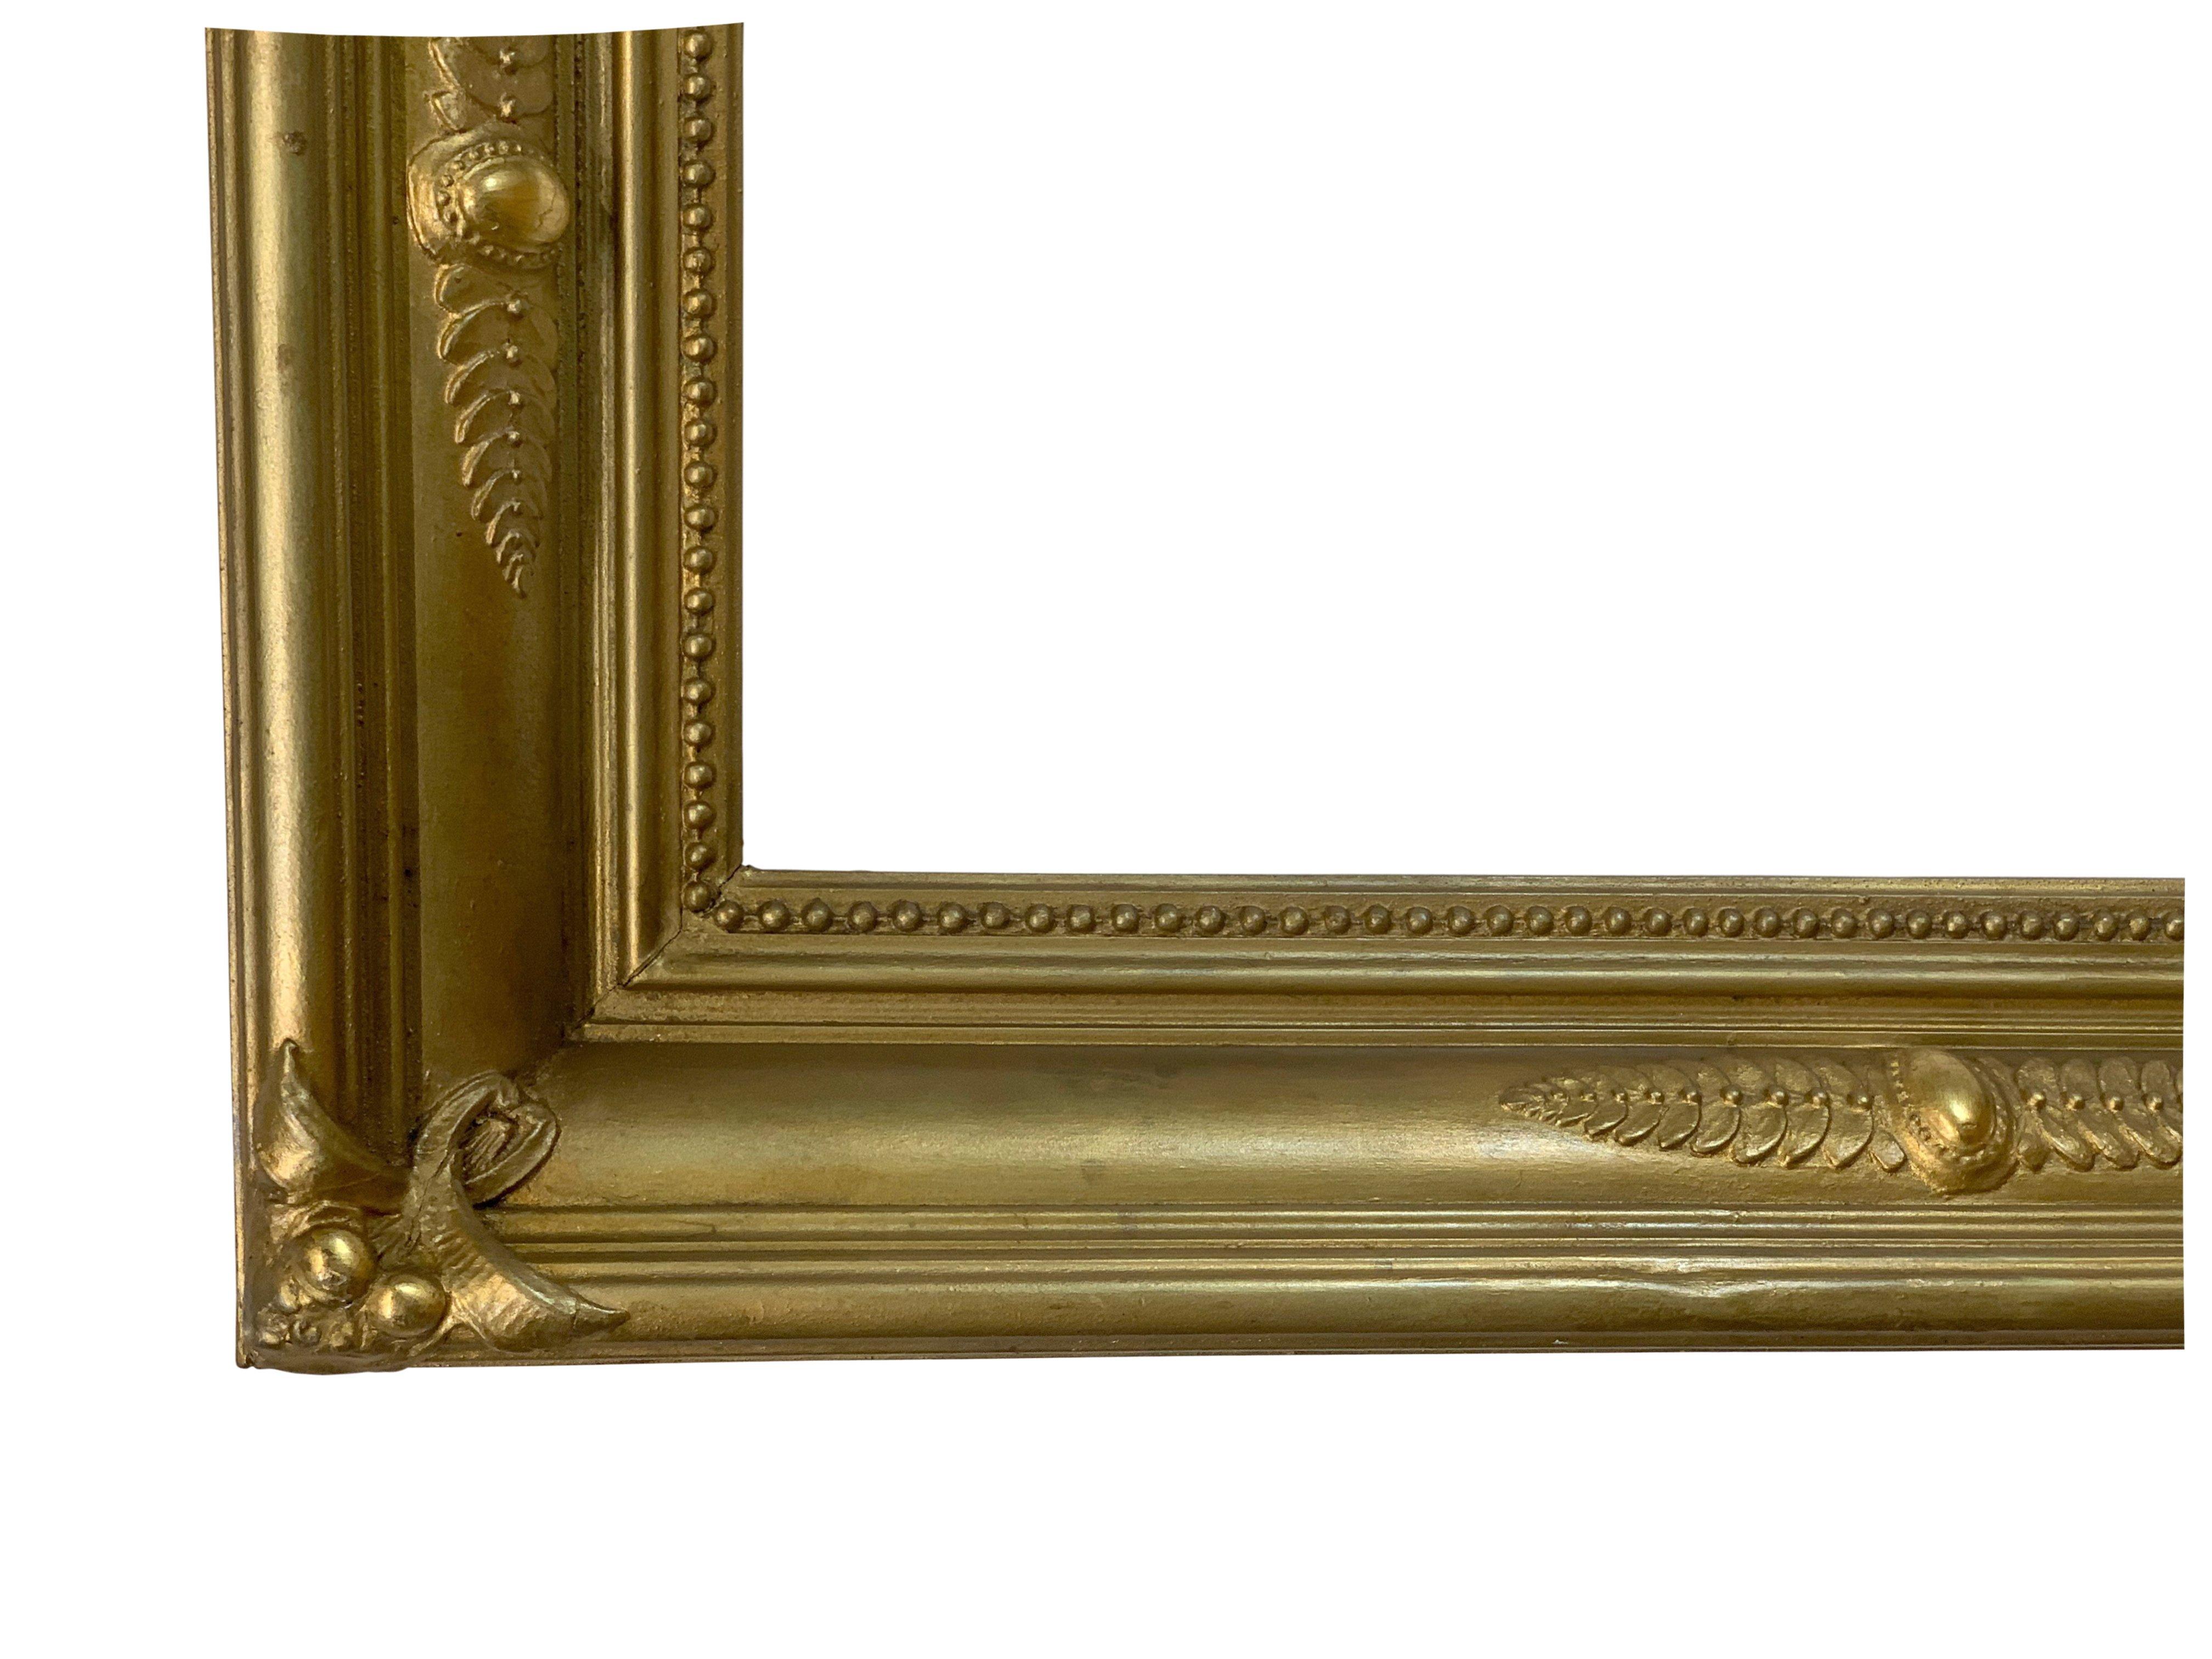 12.5 x 22.5 19th century American Federal picture frame circa 1825

Rabbet dimensions: 12.5